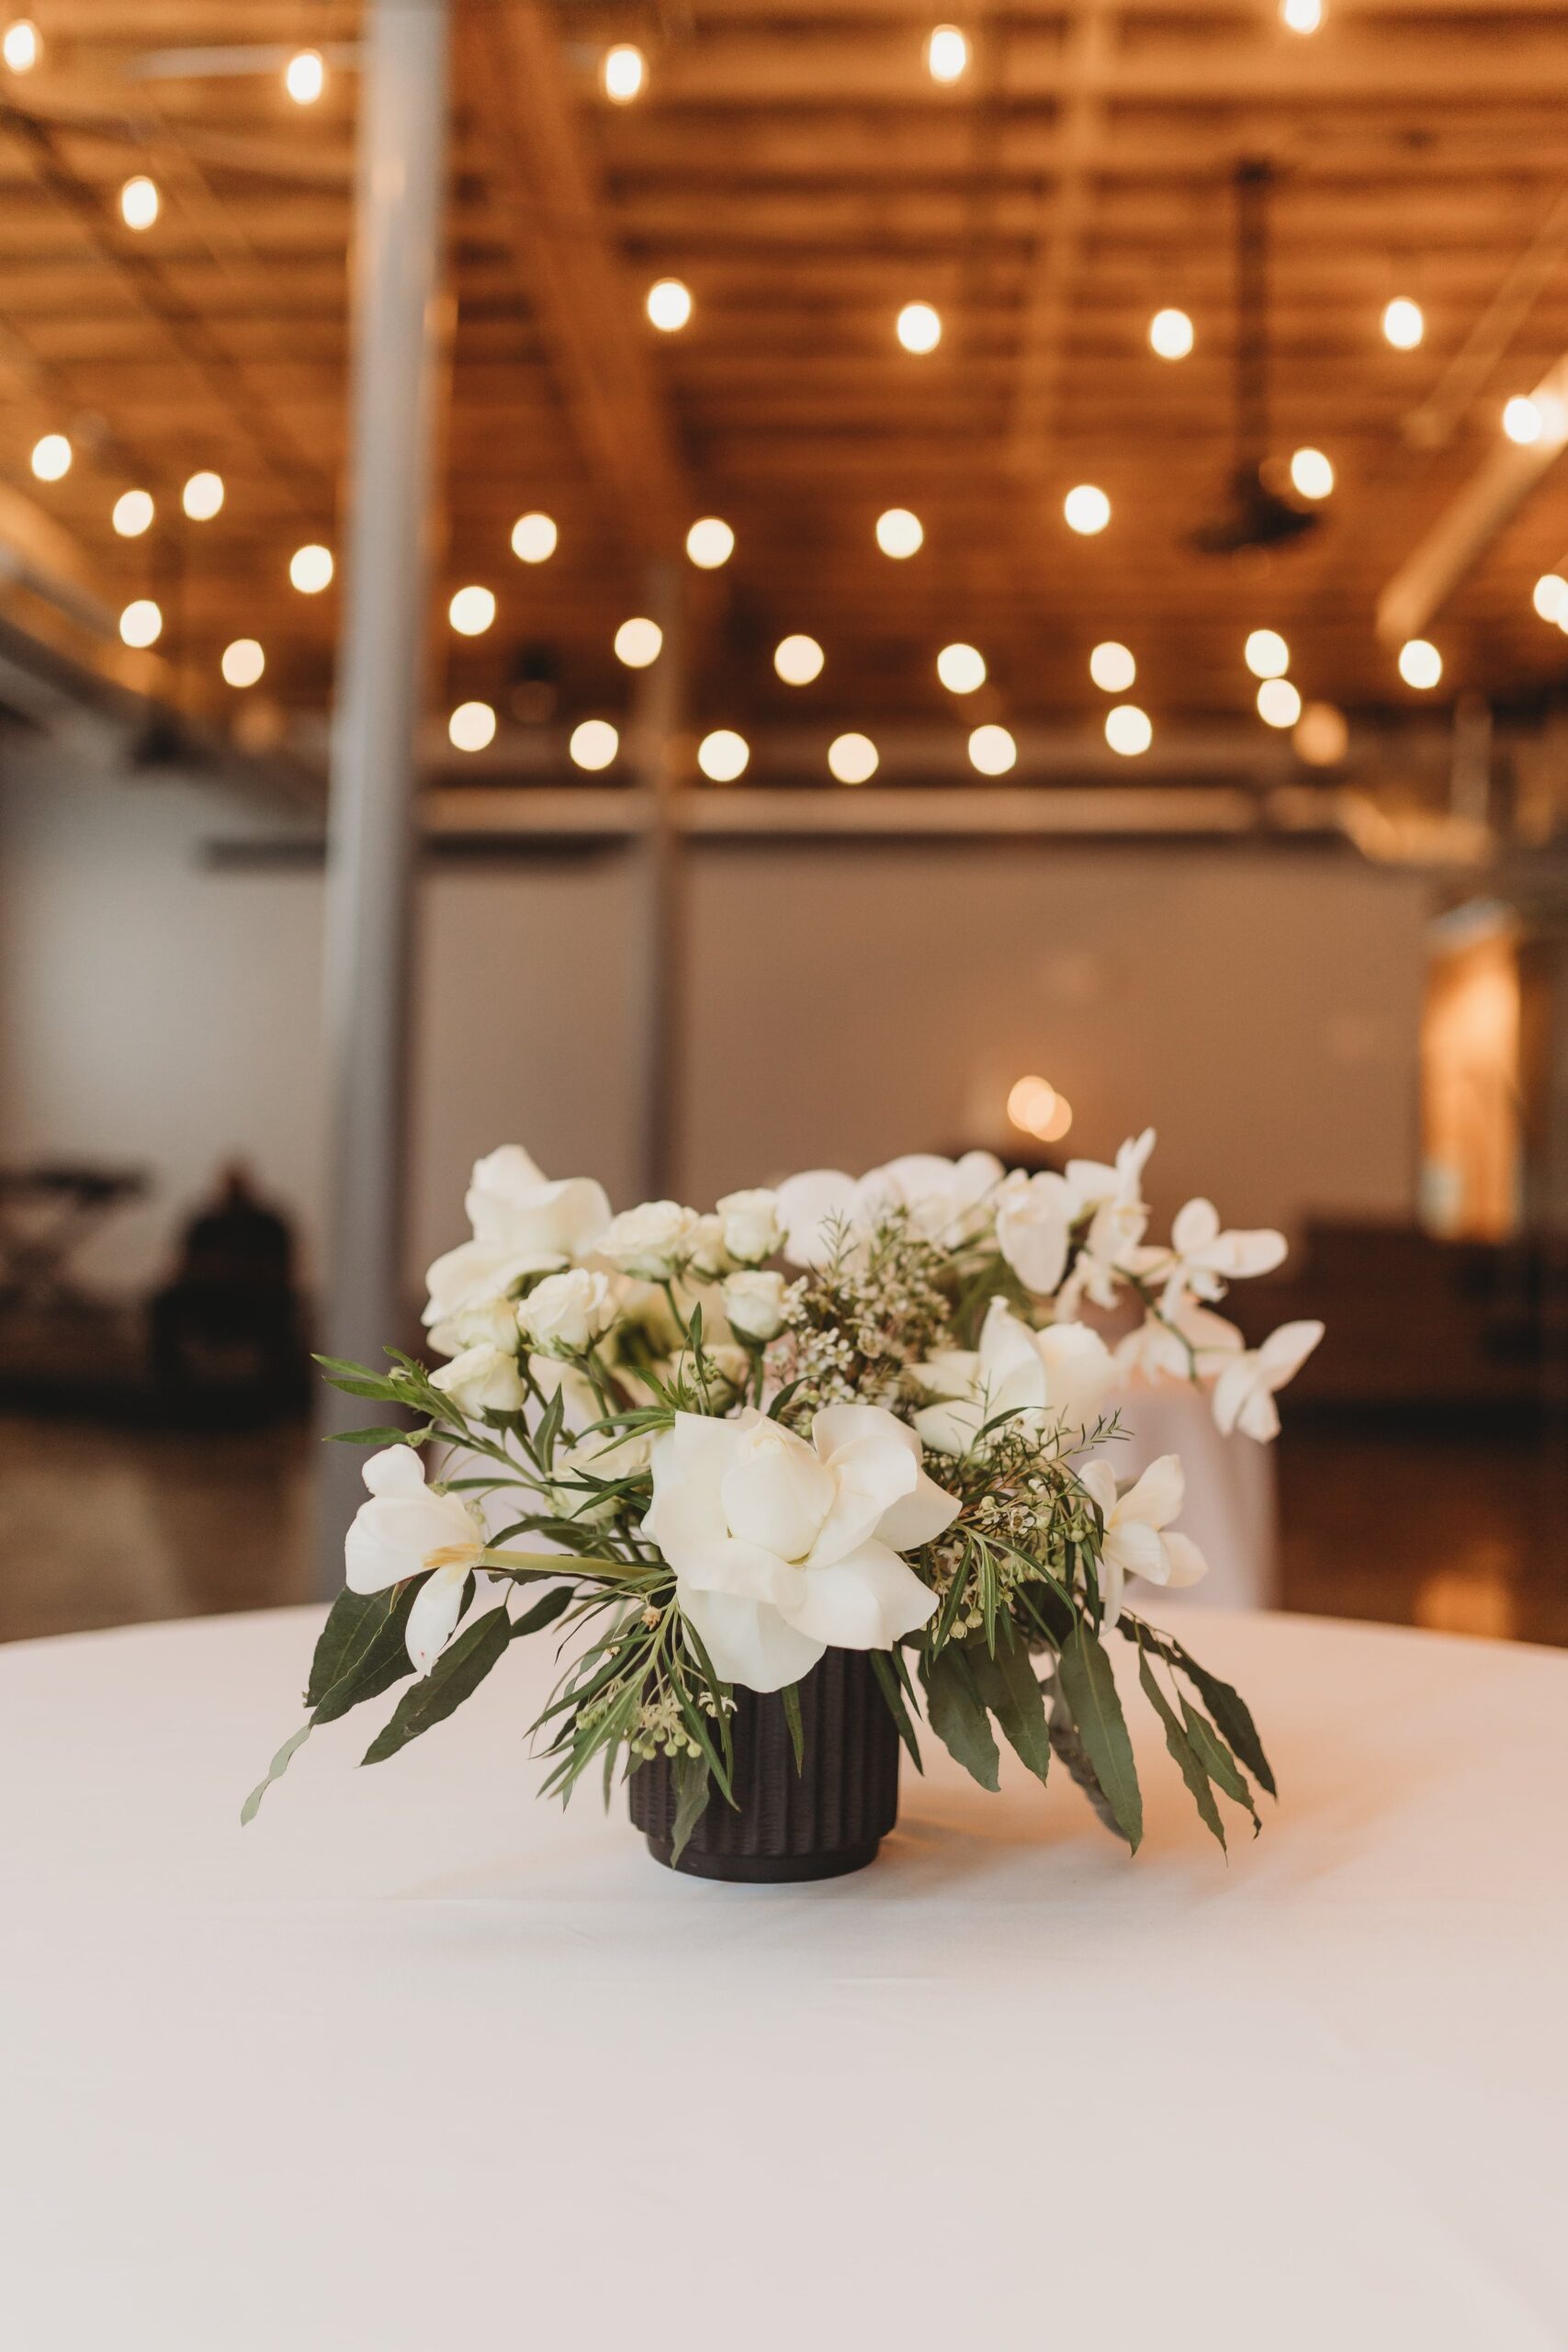 small white centerpiece in a black vase at an Outreach Event Space wedding